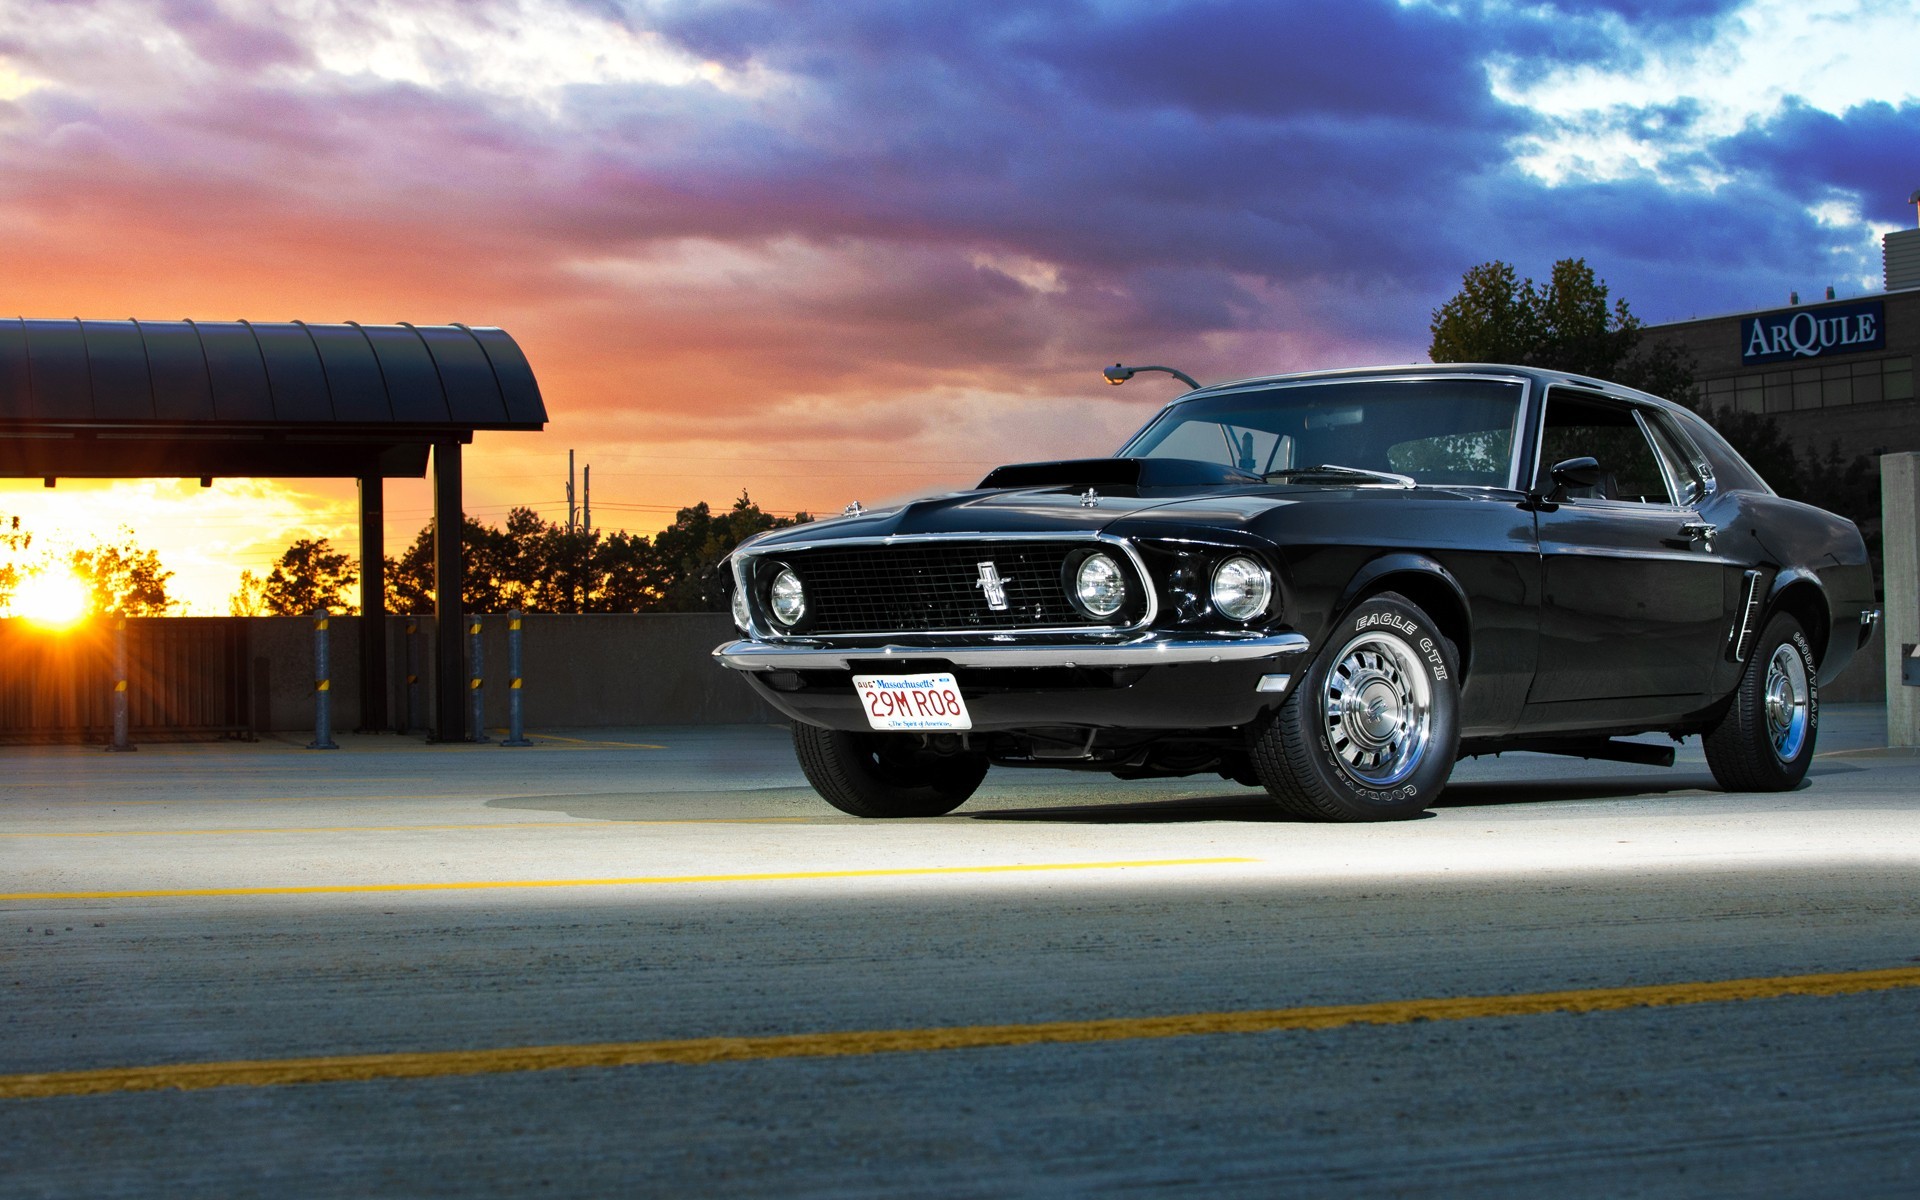 1920x1200 Free Muscle Car Image Download.